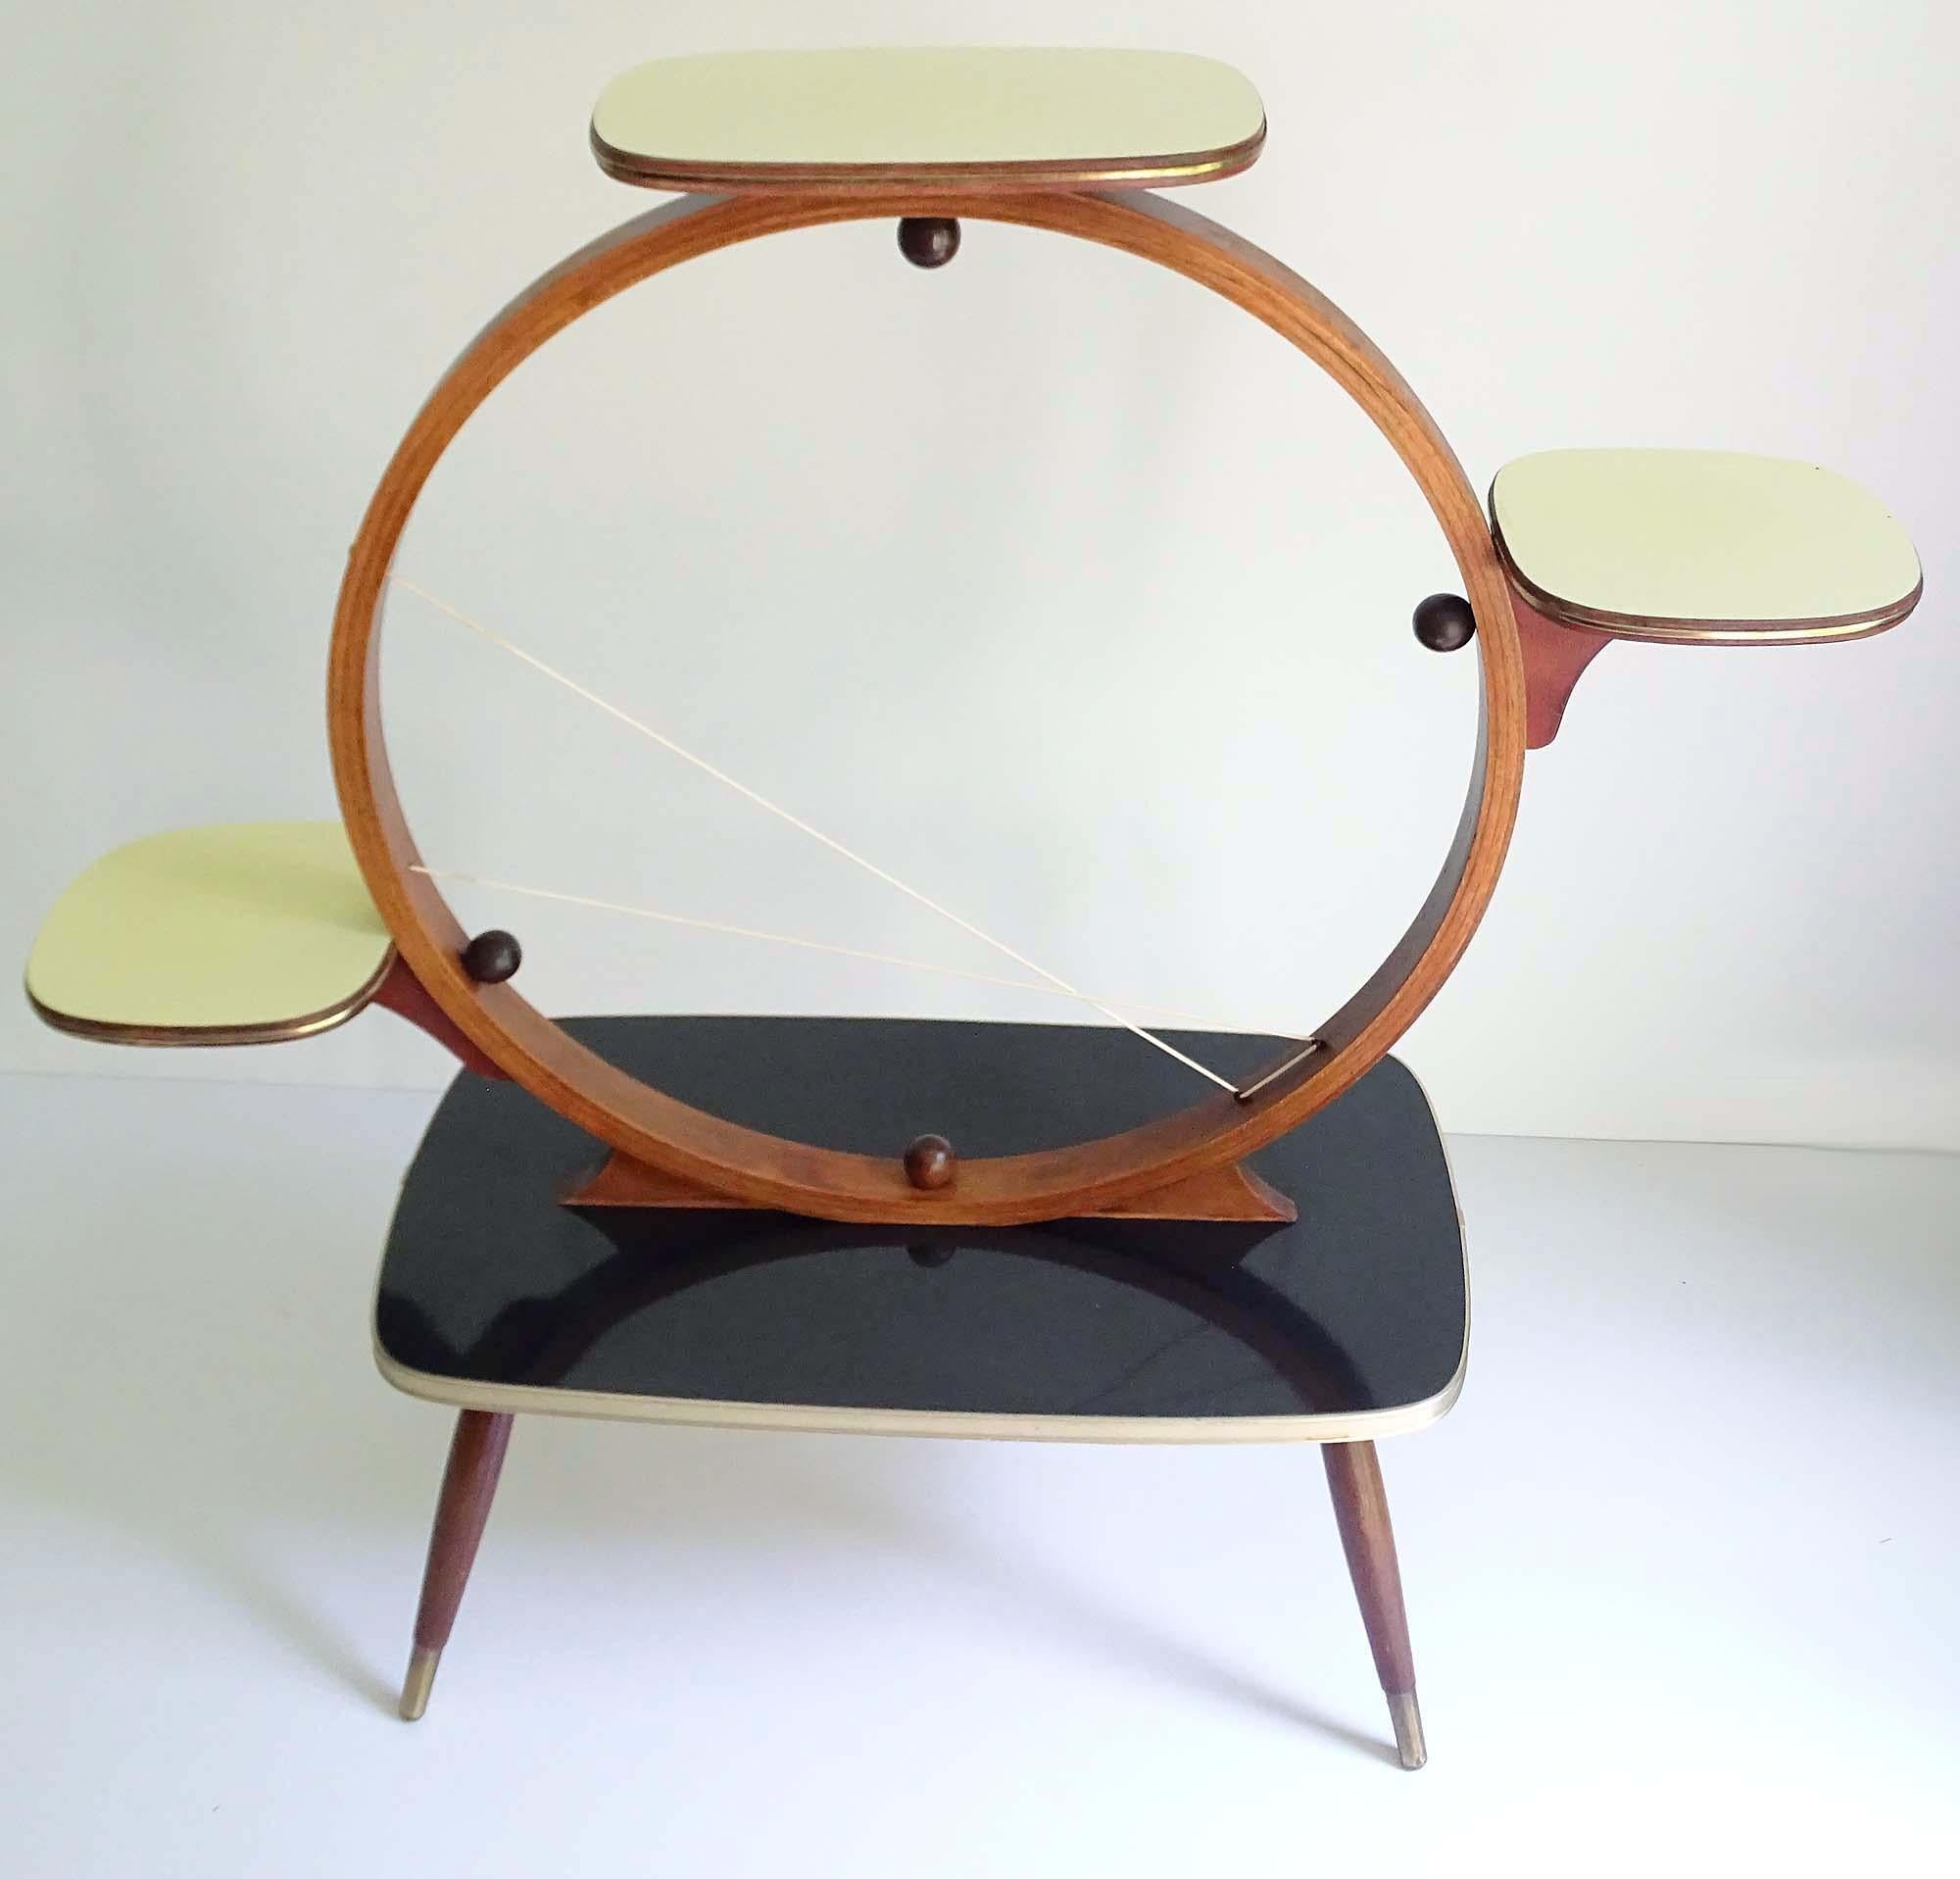 Stunning Mid-Century Modern flower / plant stand. This is an extremely rare quite large model. It features 1 large rectangular lower plate and 3 smaller plates, arranged in clockwise fashion on wooden circle structure, 2 synthetic bands for added